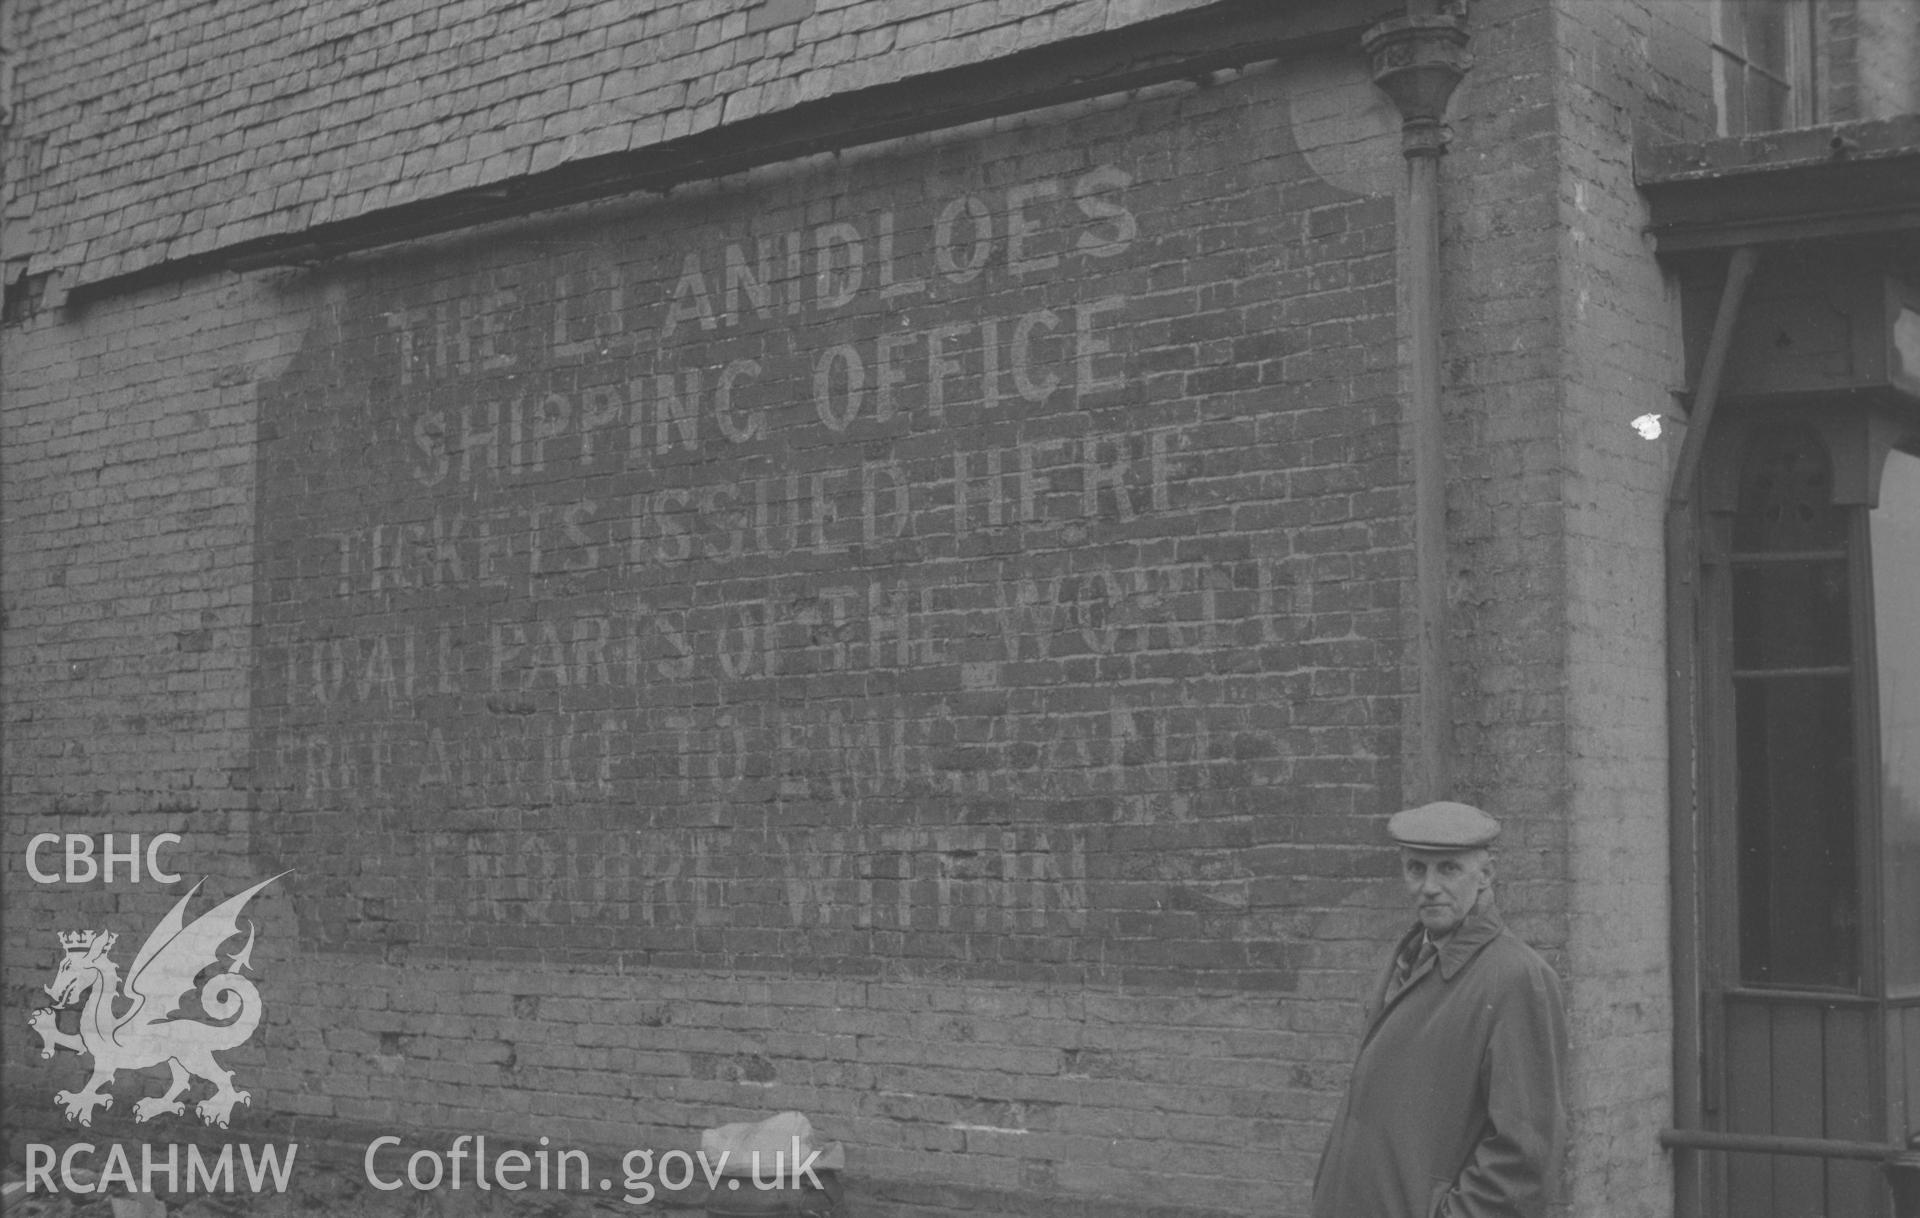 Black and White photograph showing emigration notice outside Llanidloes Shipping Office.